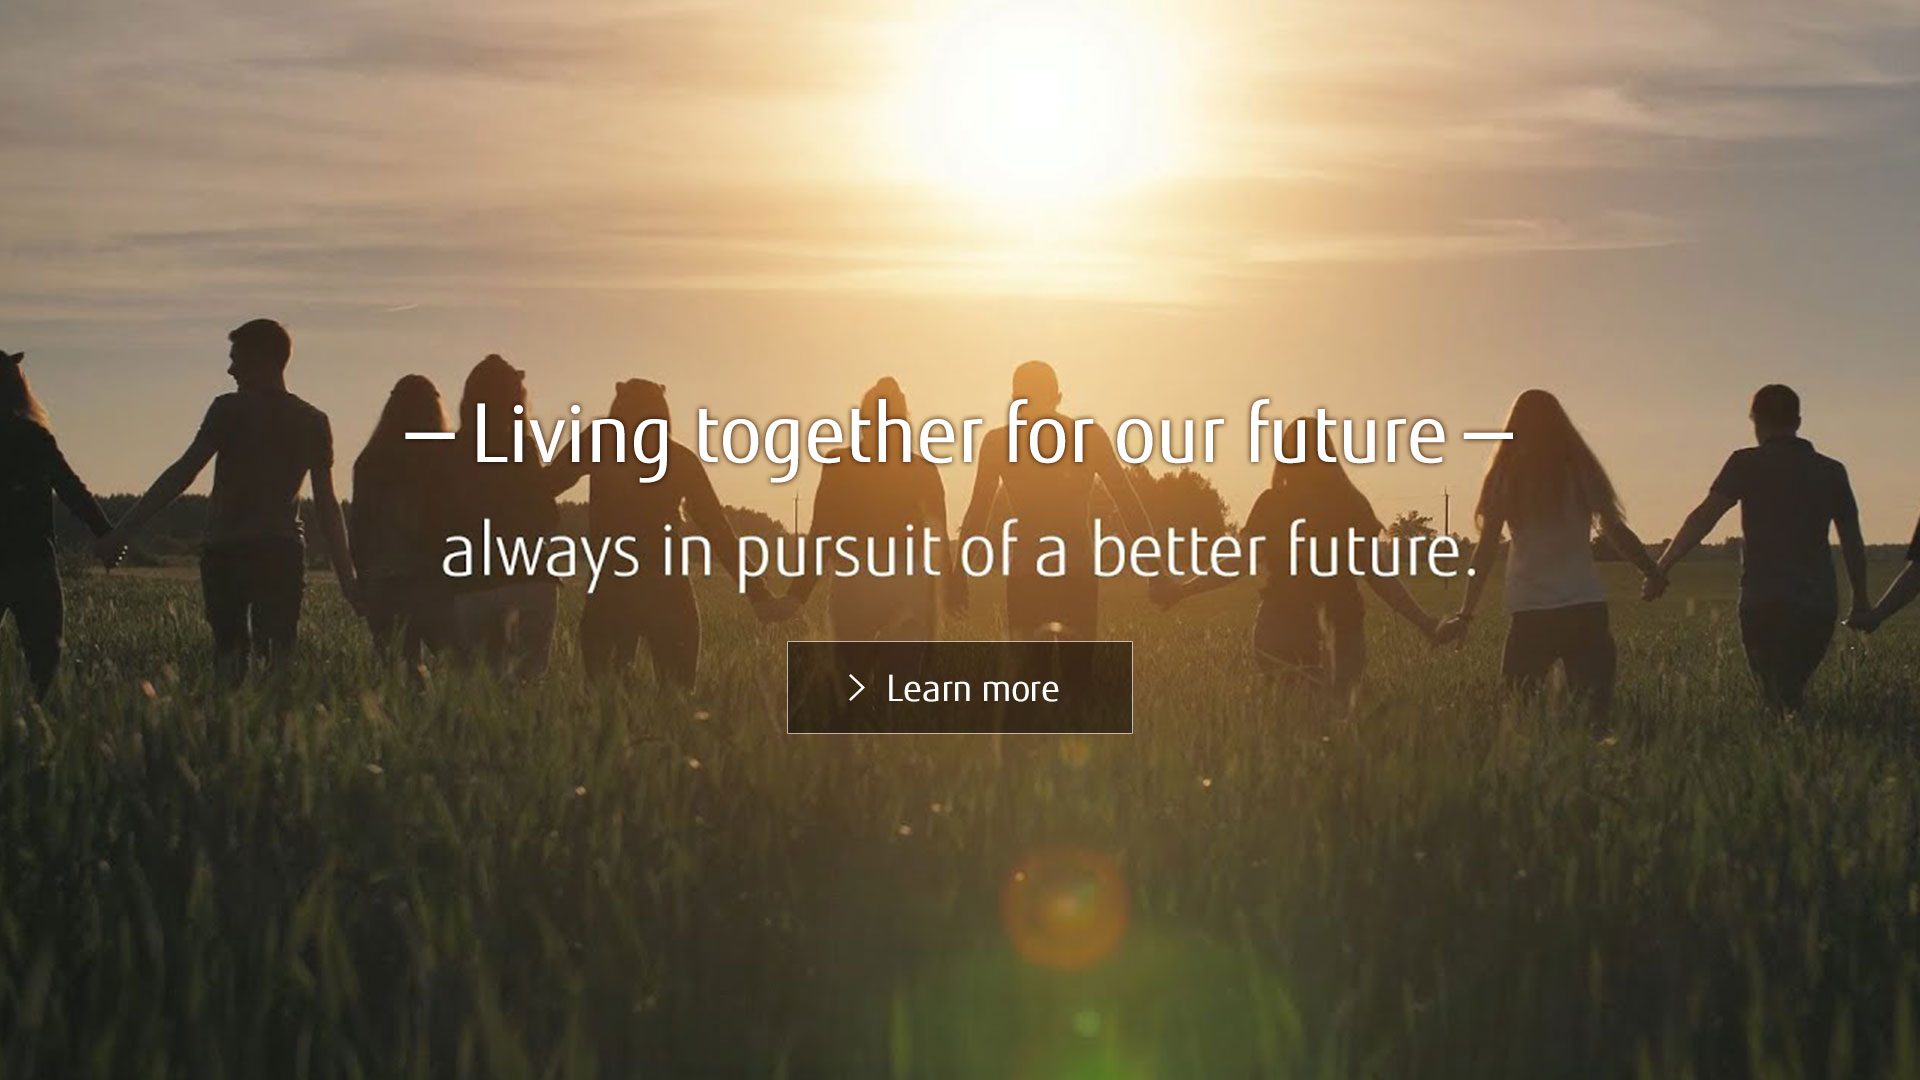 FUJITSU GENERAL Corporate Movie - Living together for our future